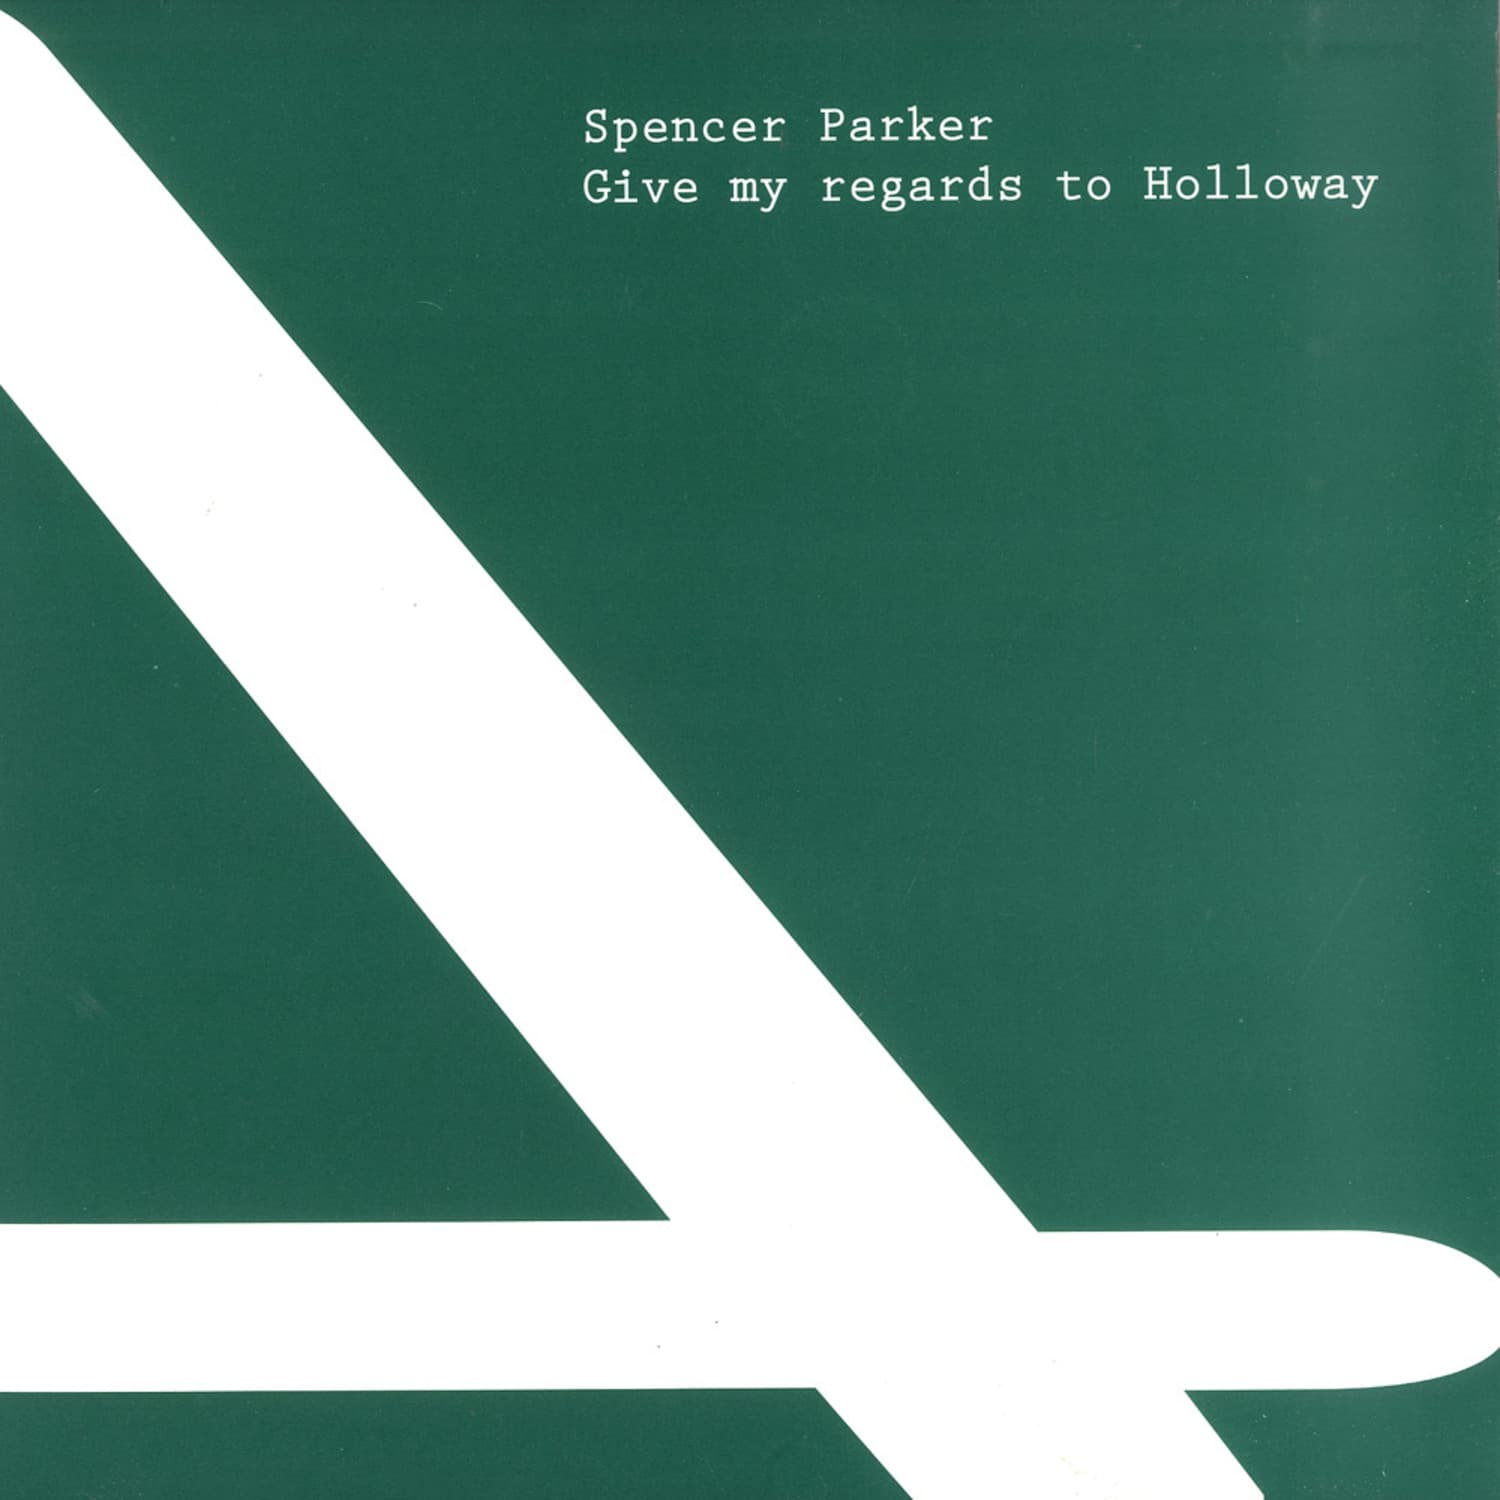 Spencer Parker - GIVE REGARDS TO HOLLOWAY